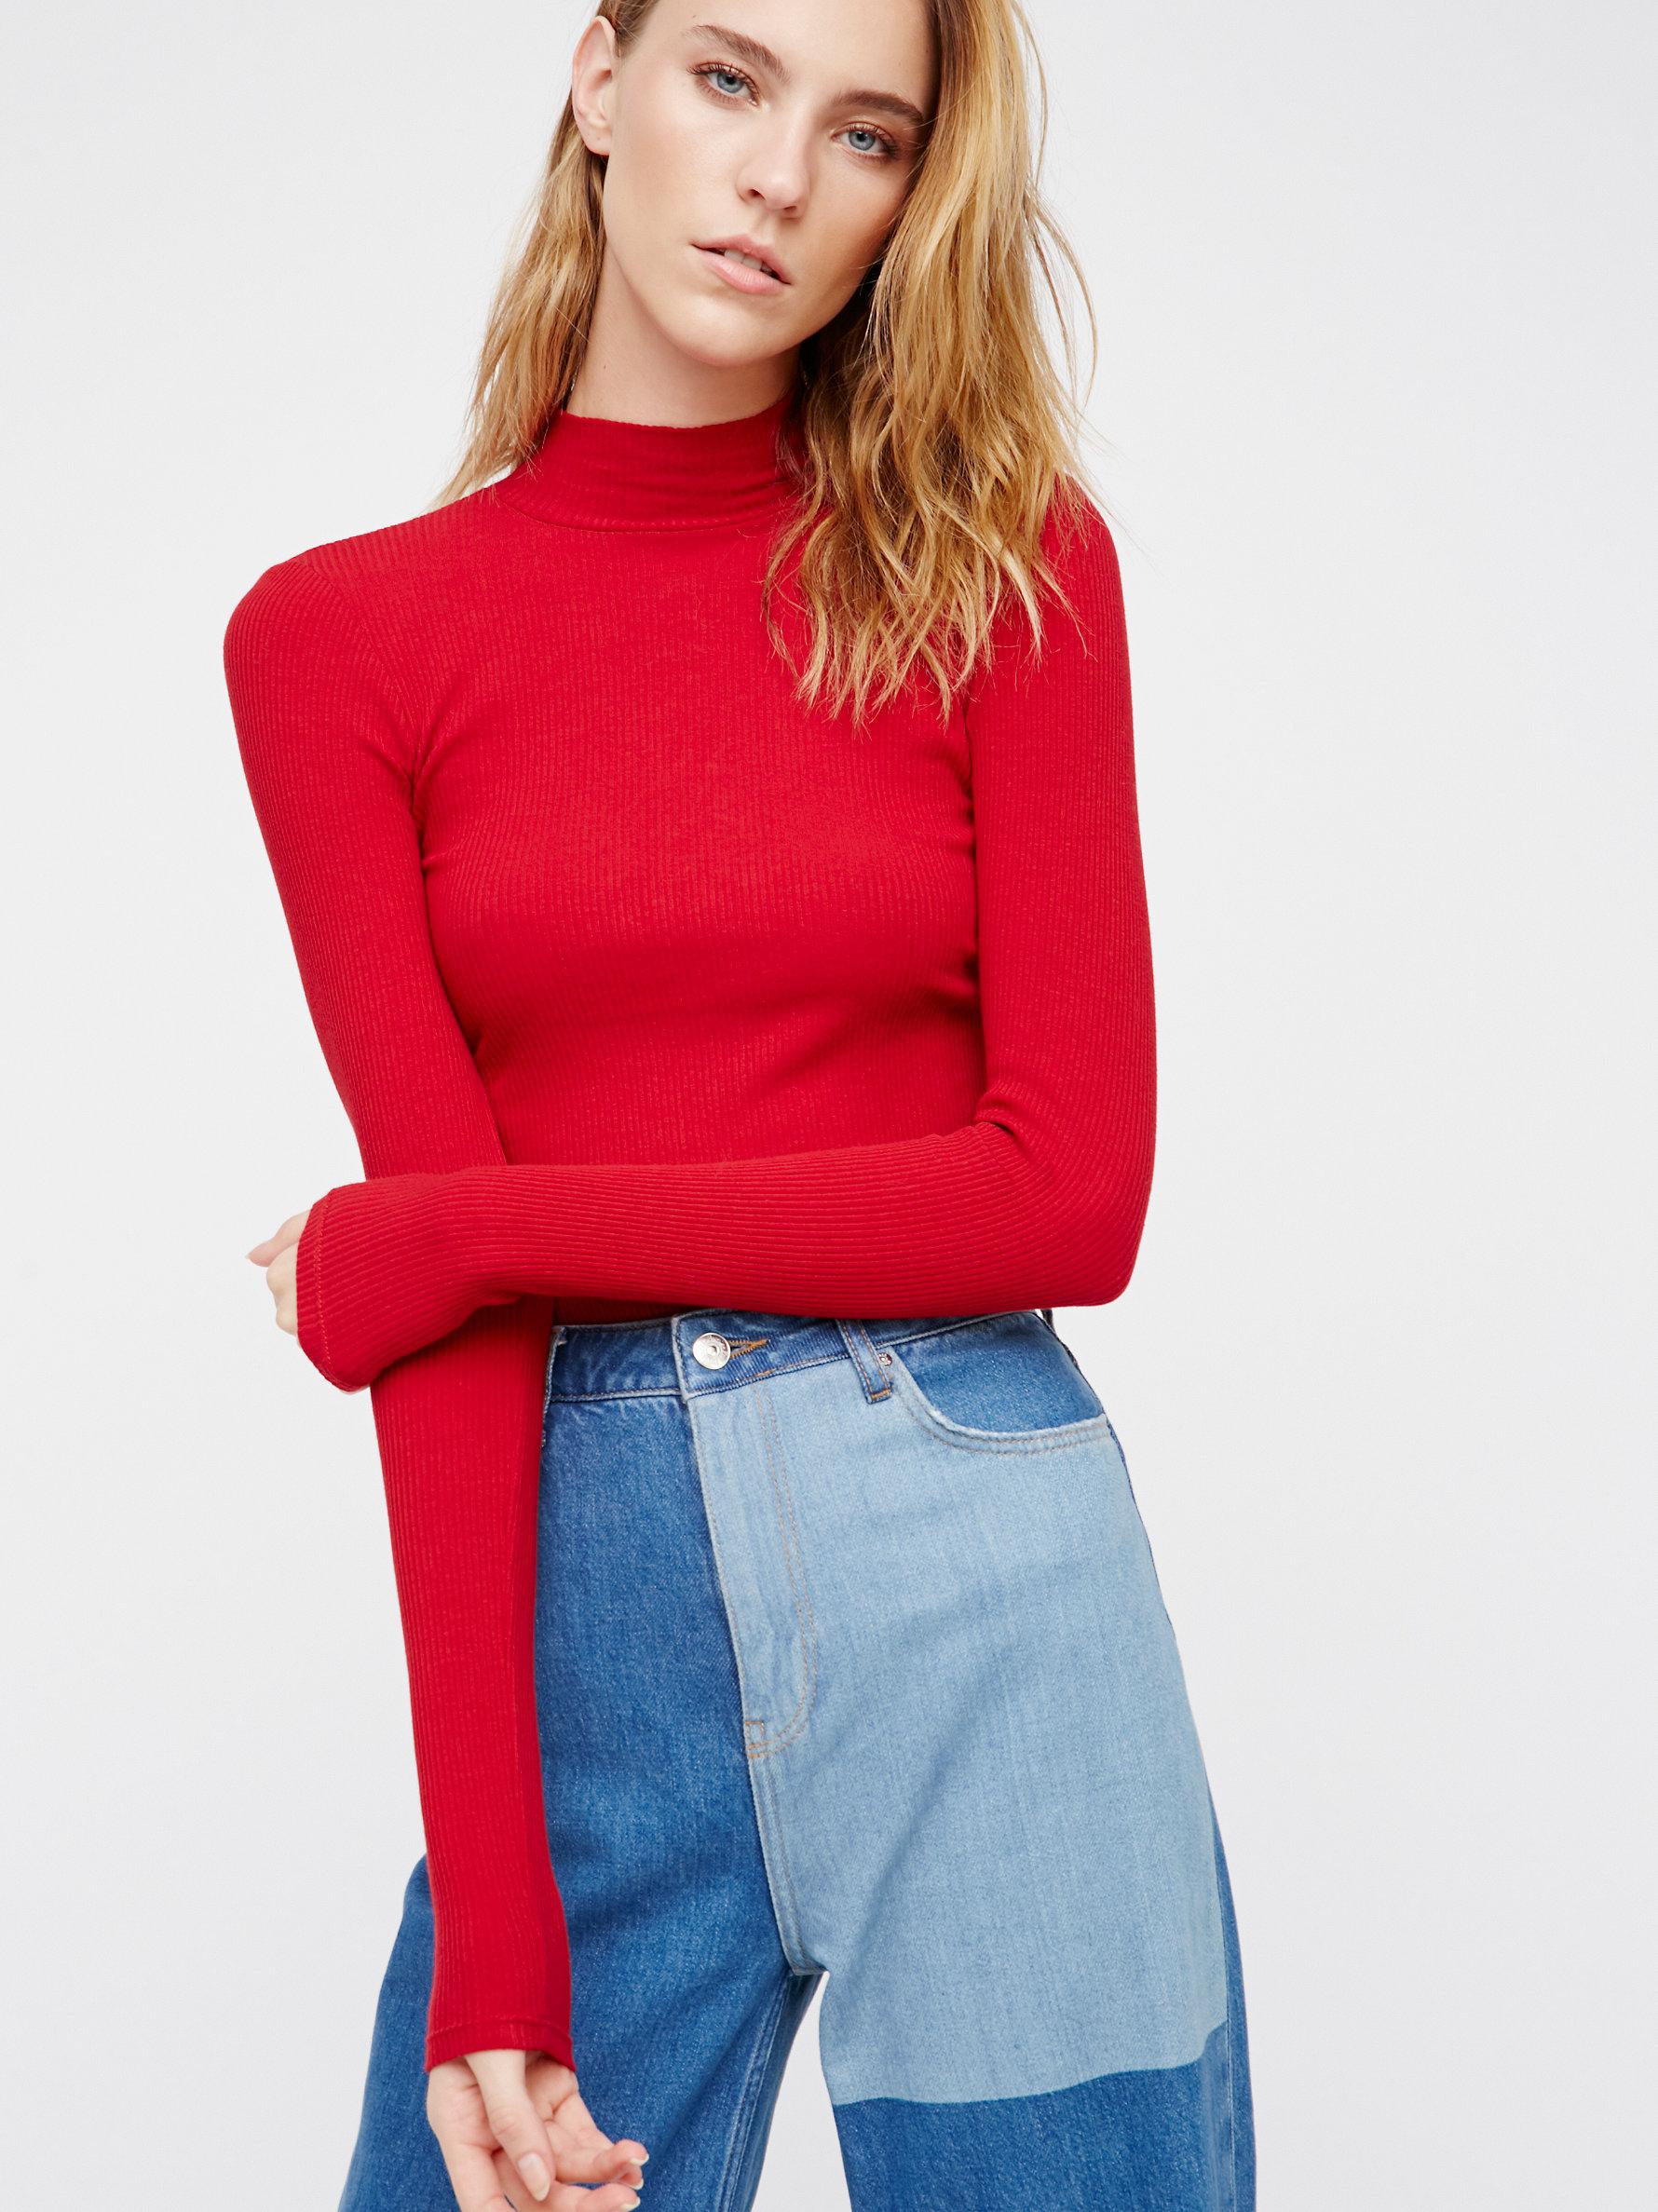 Free People Cotton Fp X Lace-up Mock Neck Top in Cherry (Red) - Lyst